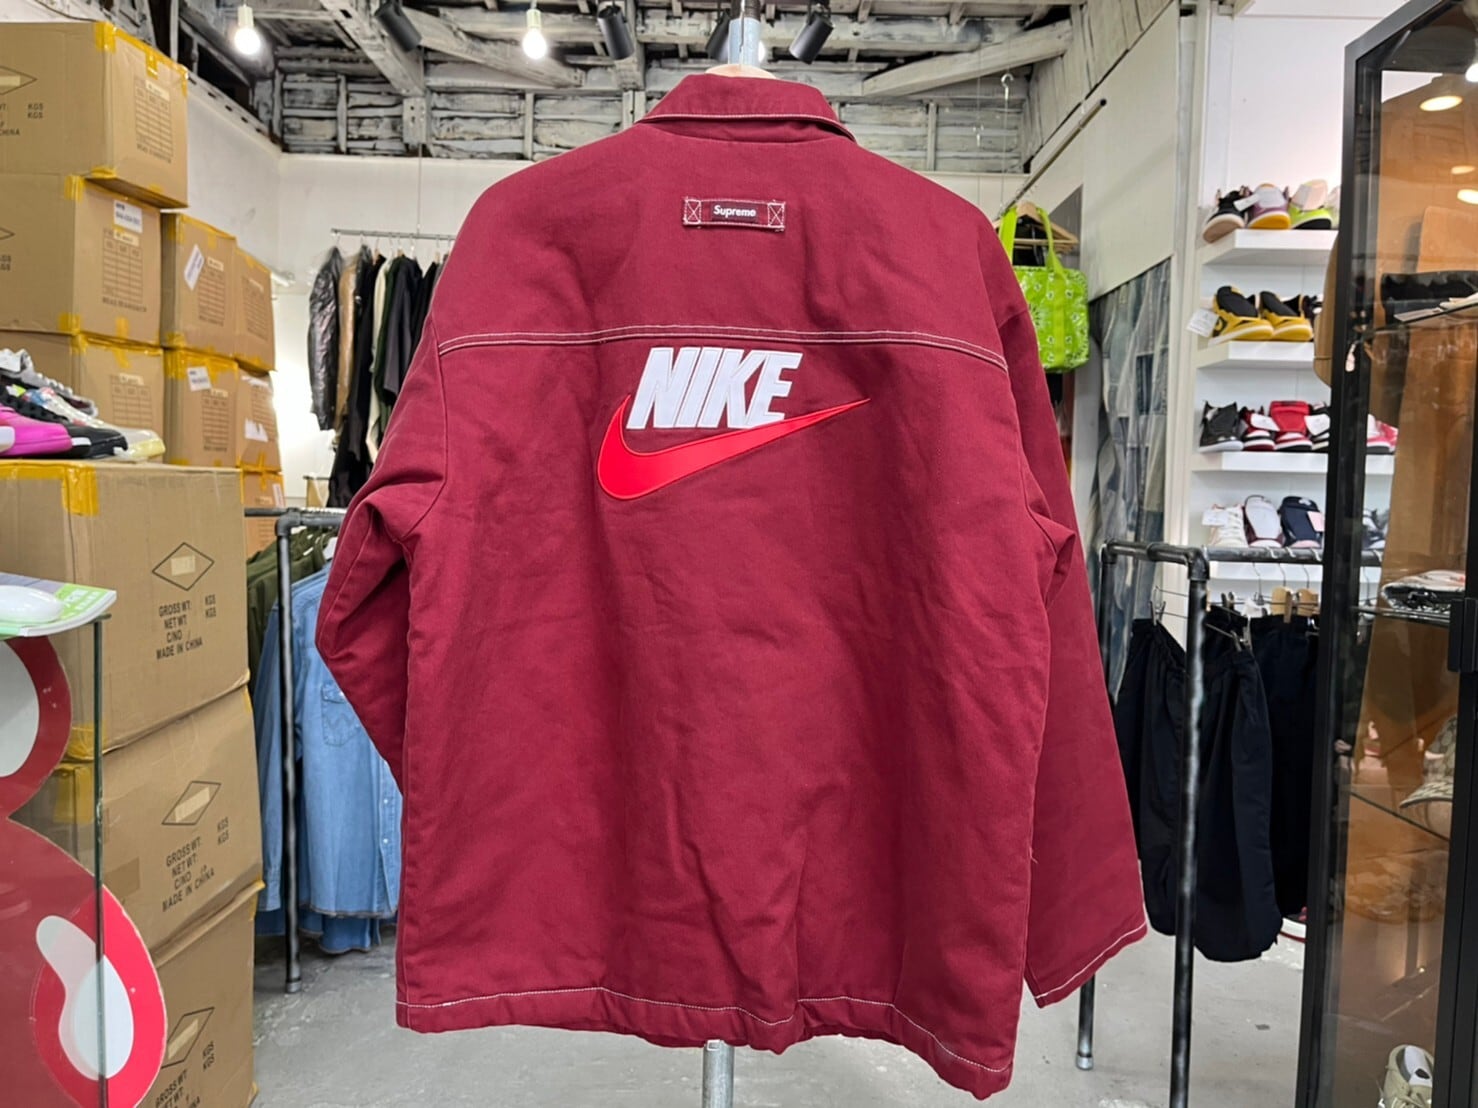 Supreme NIKE DOUBLE ZIP Quilted work